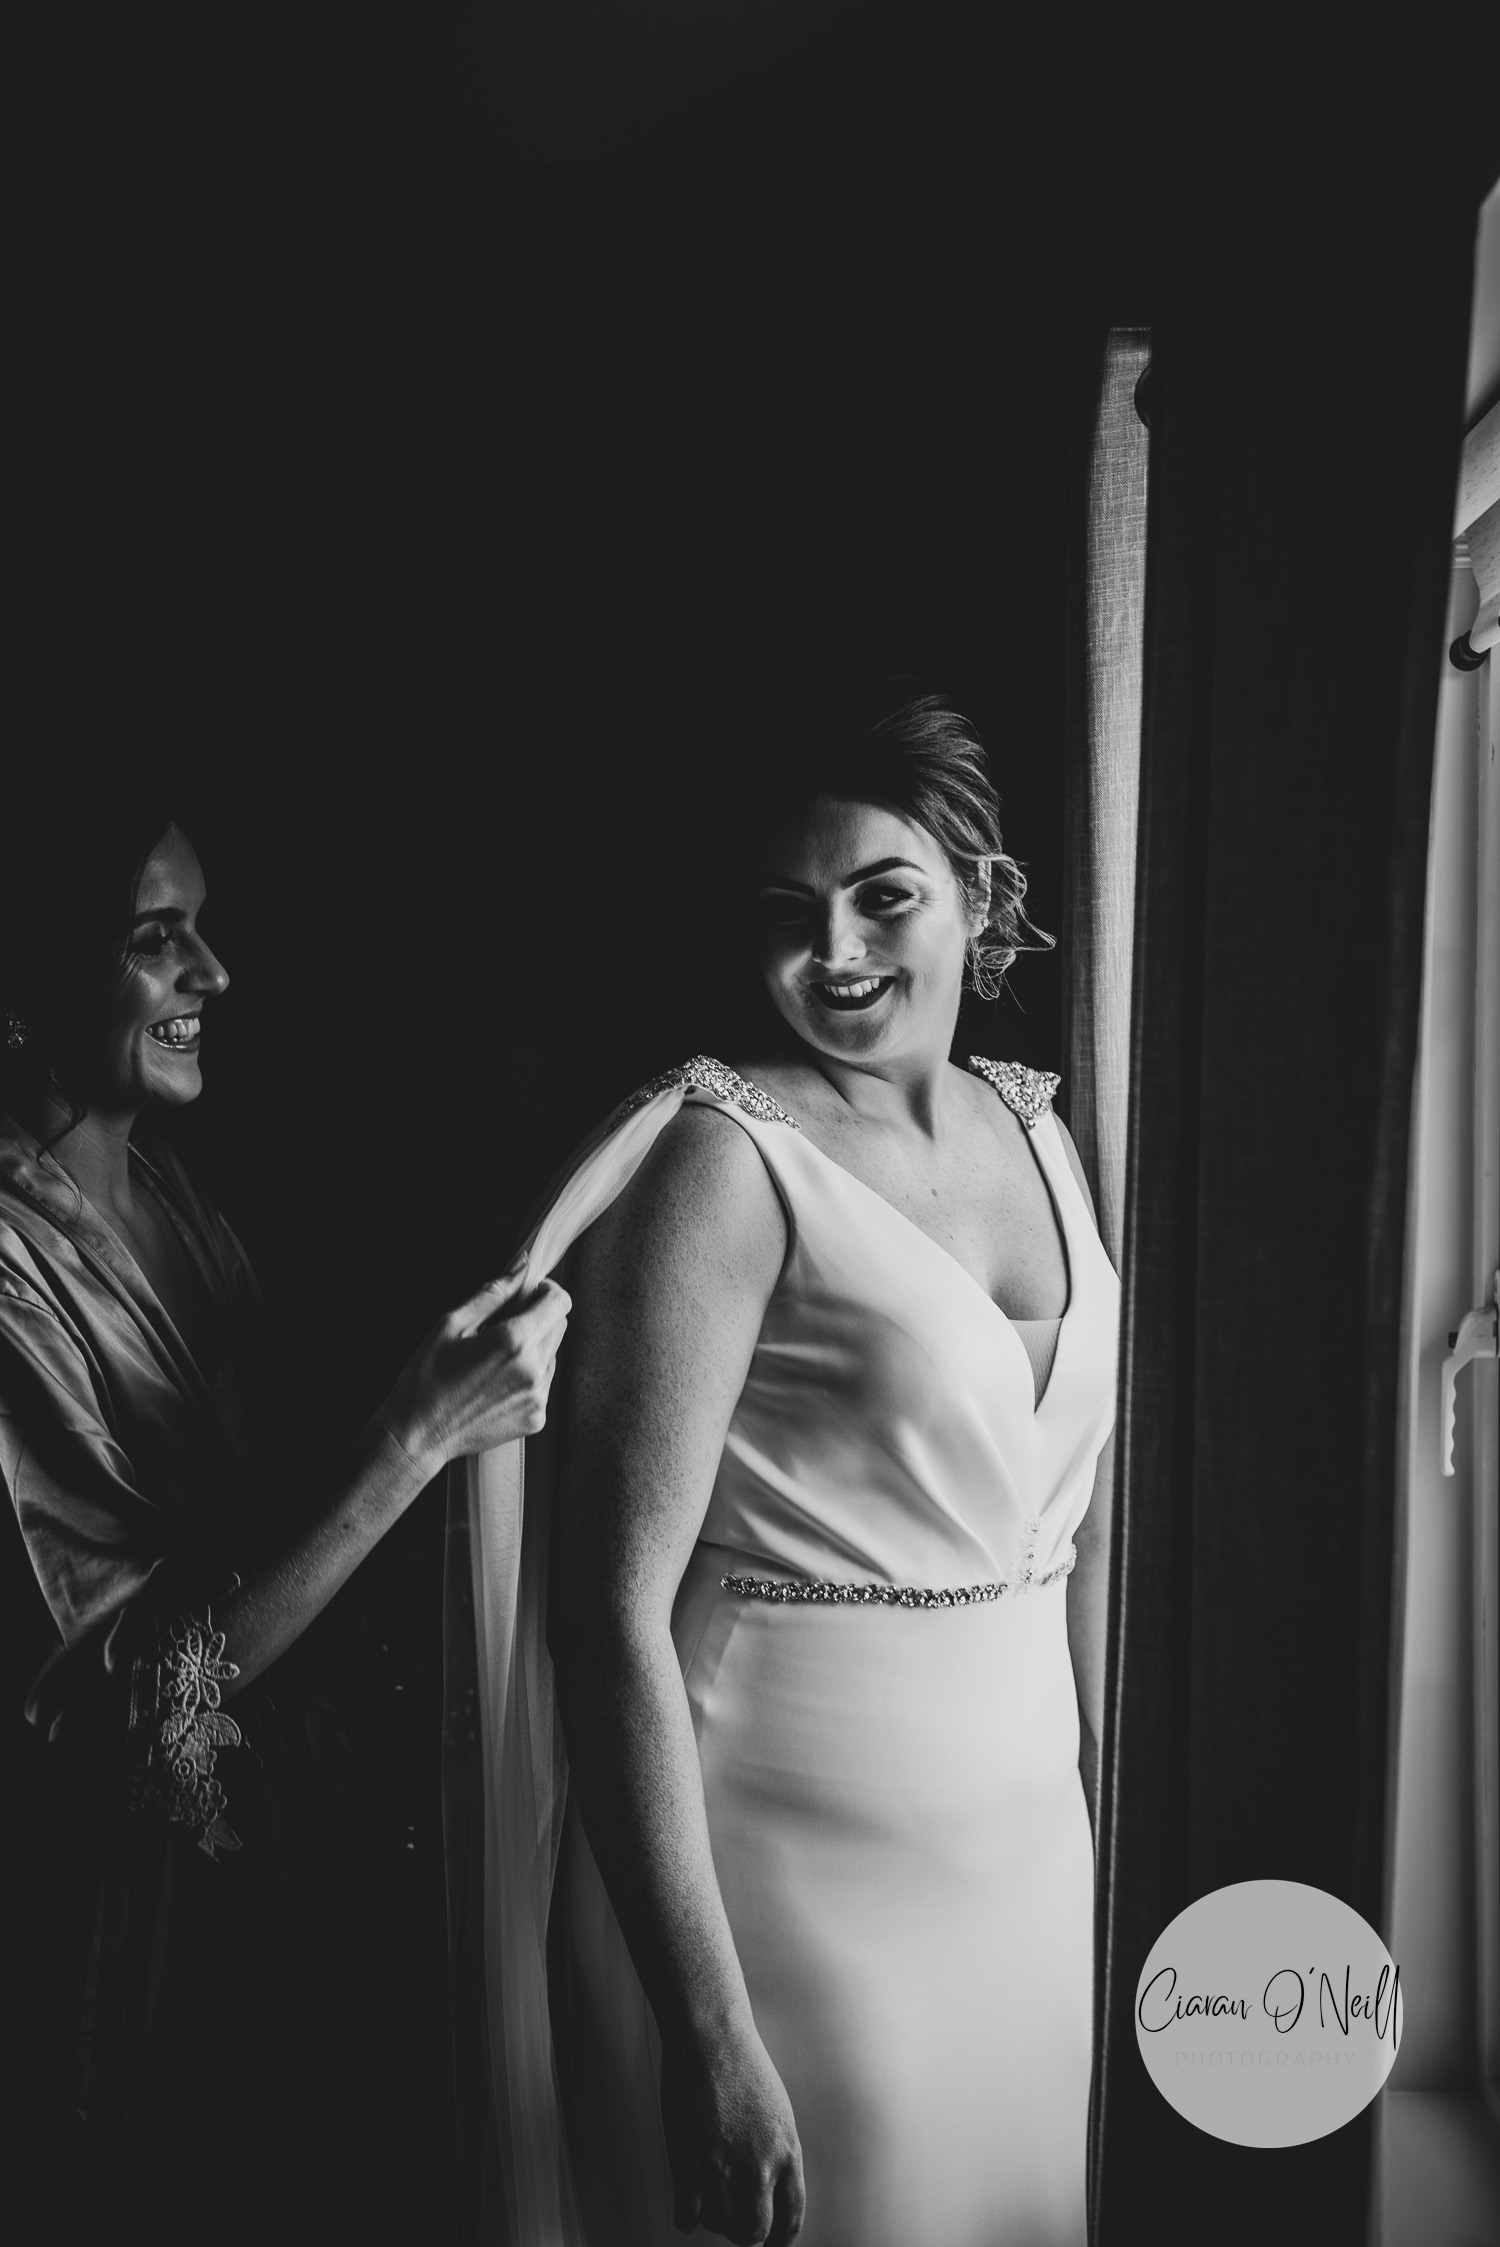 Bridesmaid helping the bride get ready beside a large window